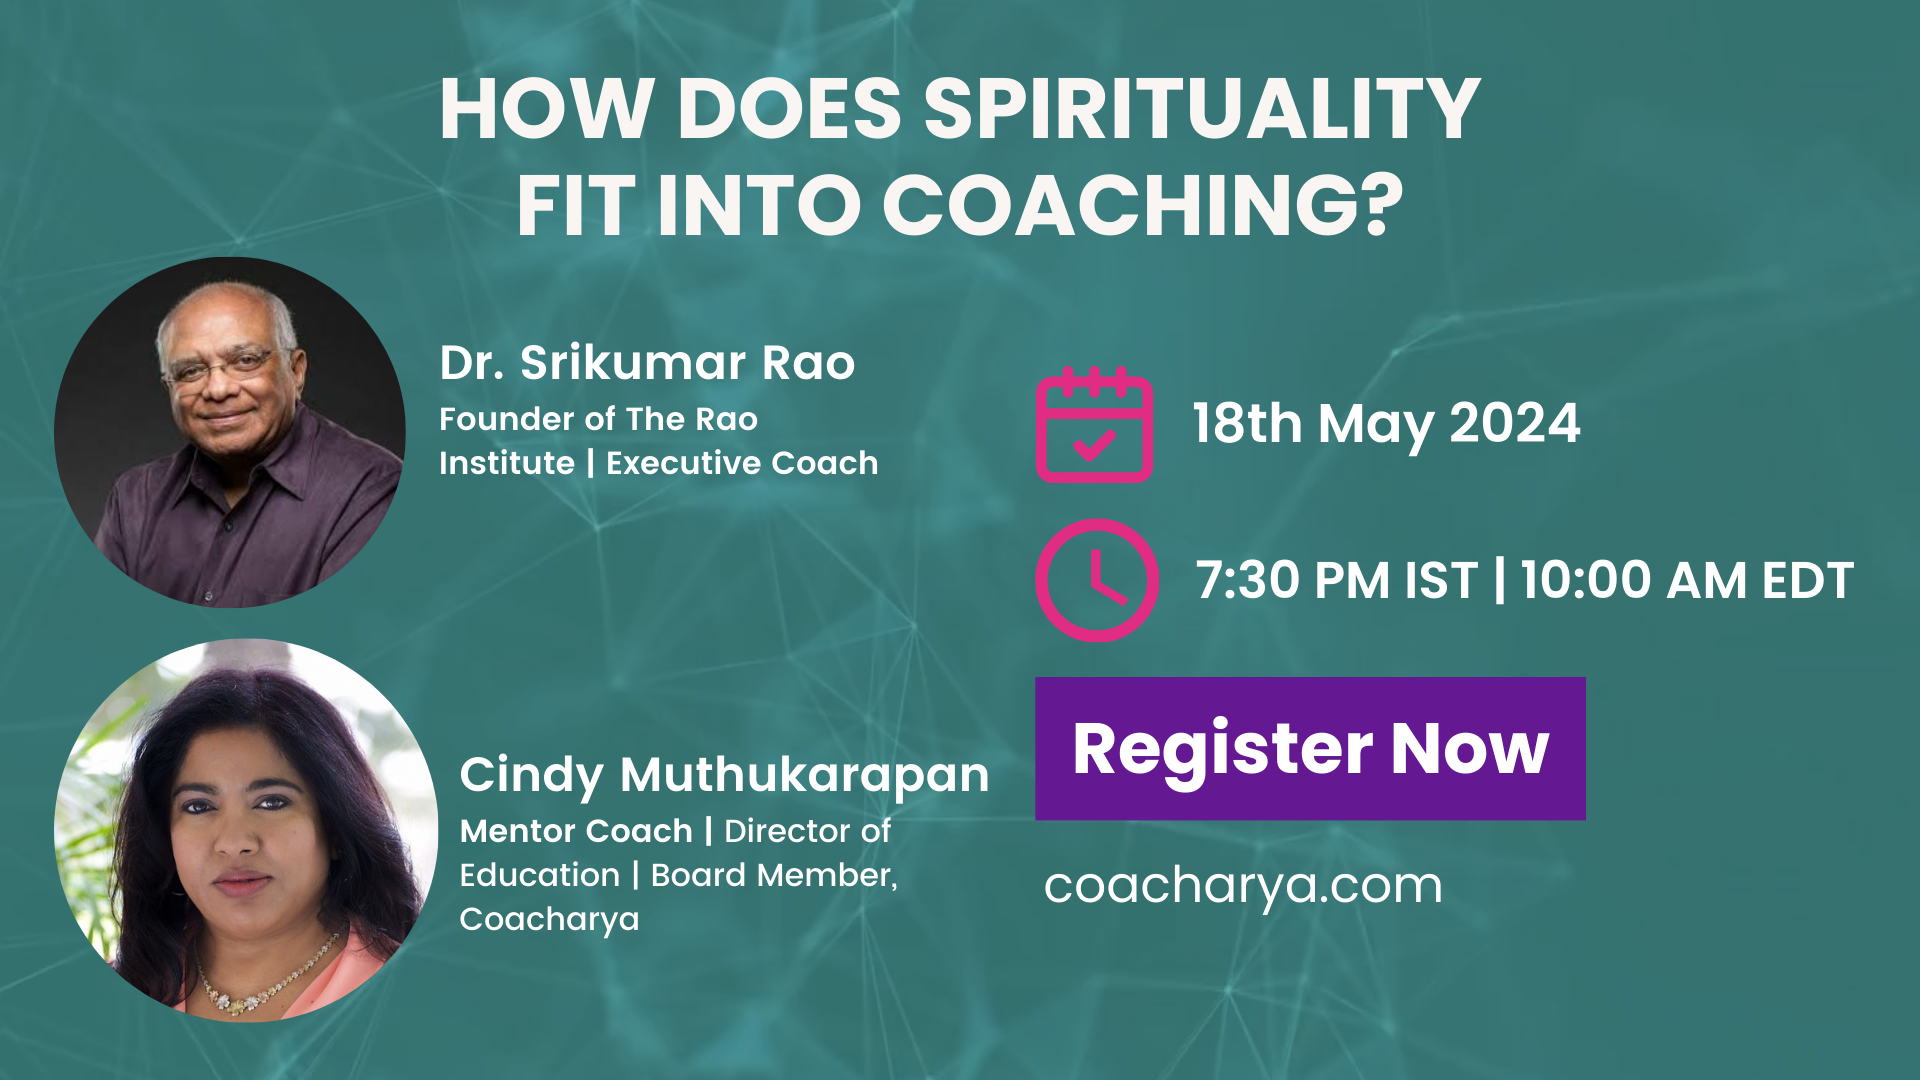 How does spirituality fit into coaching